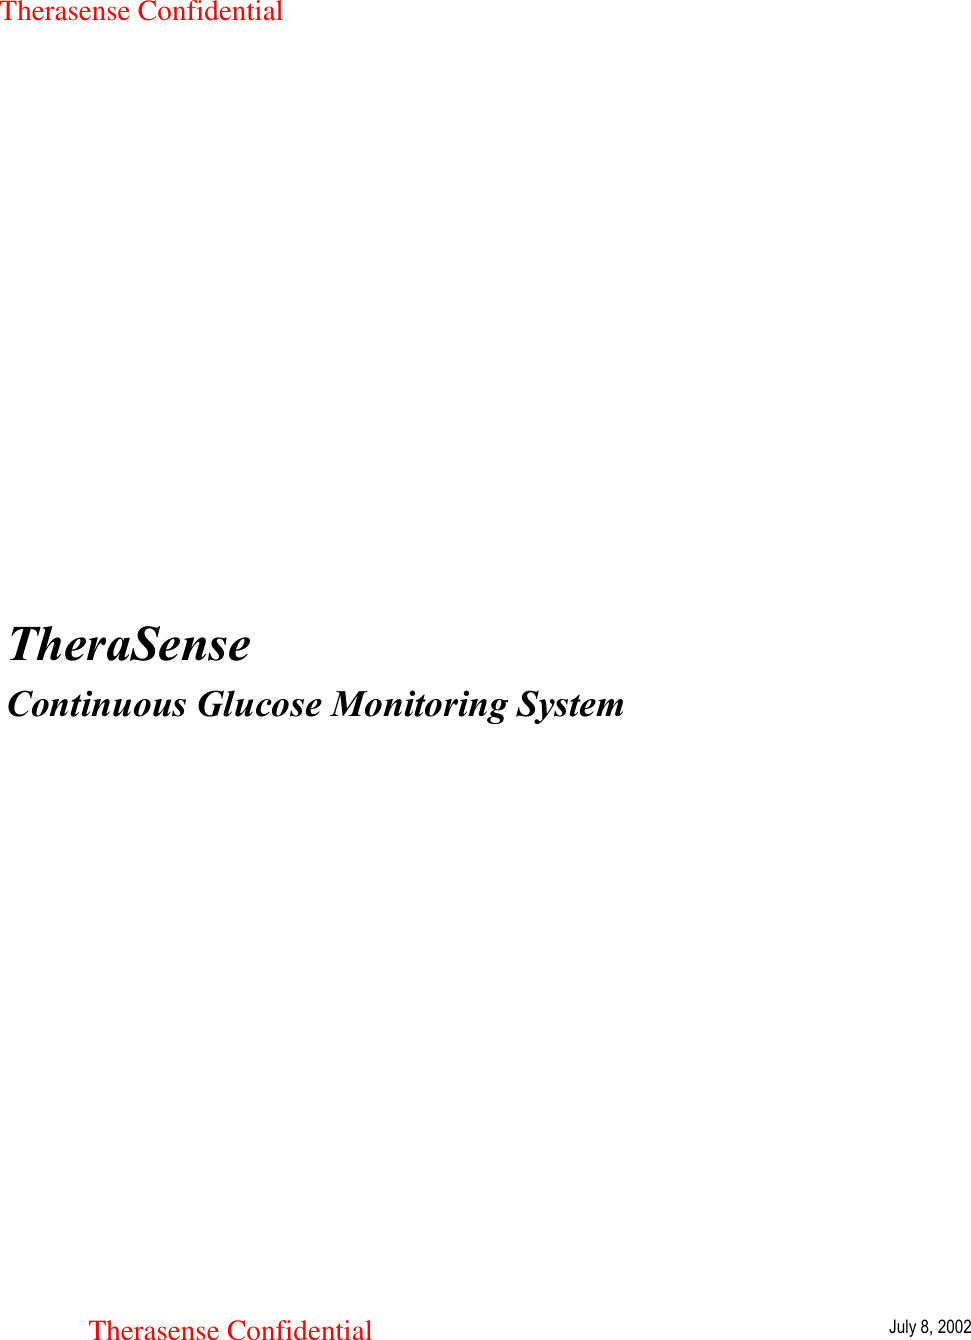 TheraSenseContinuous Glucose Monitoring SystemJuly 8, 2002Therasense ConfidentialTherasense Confidential